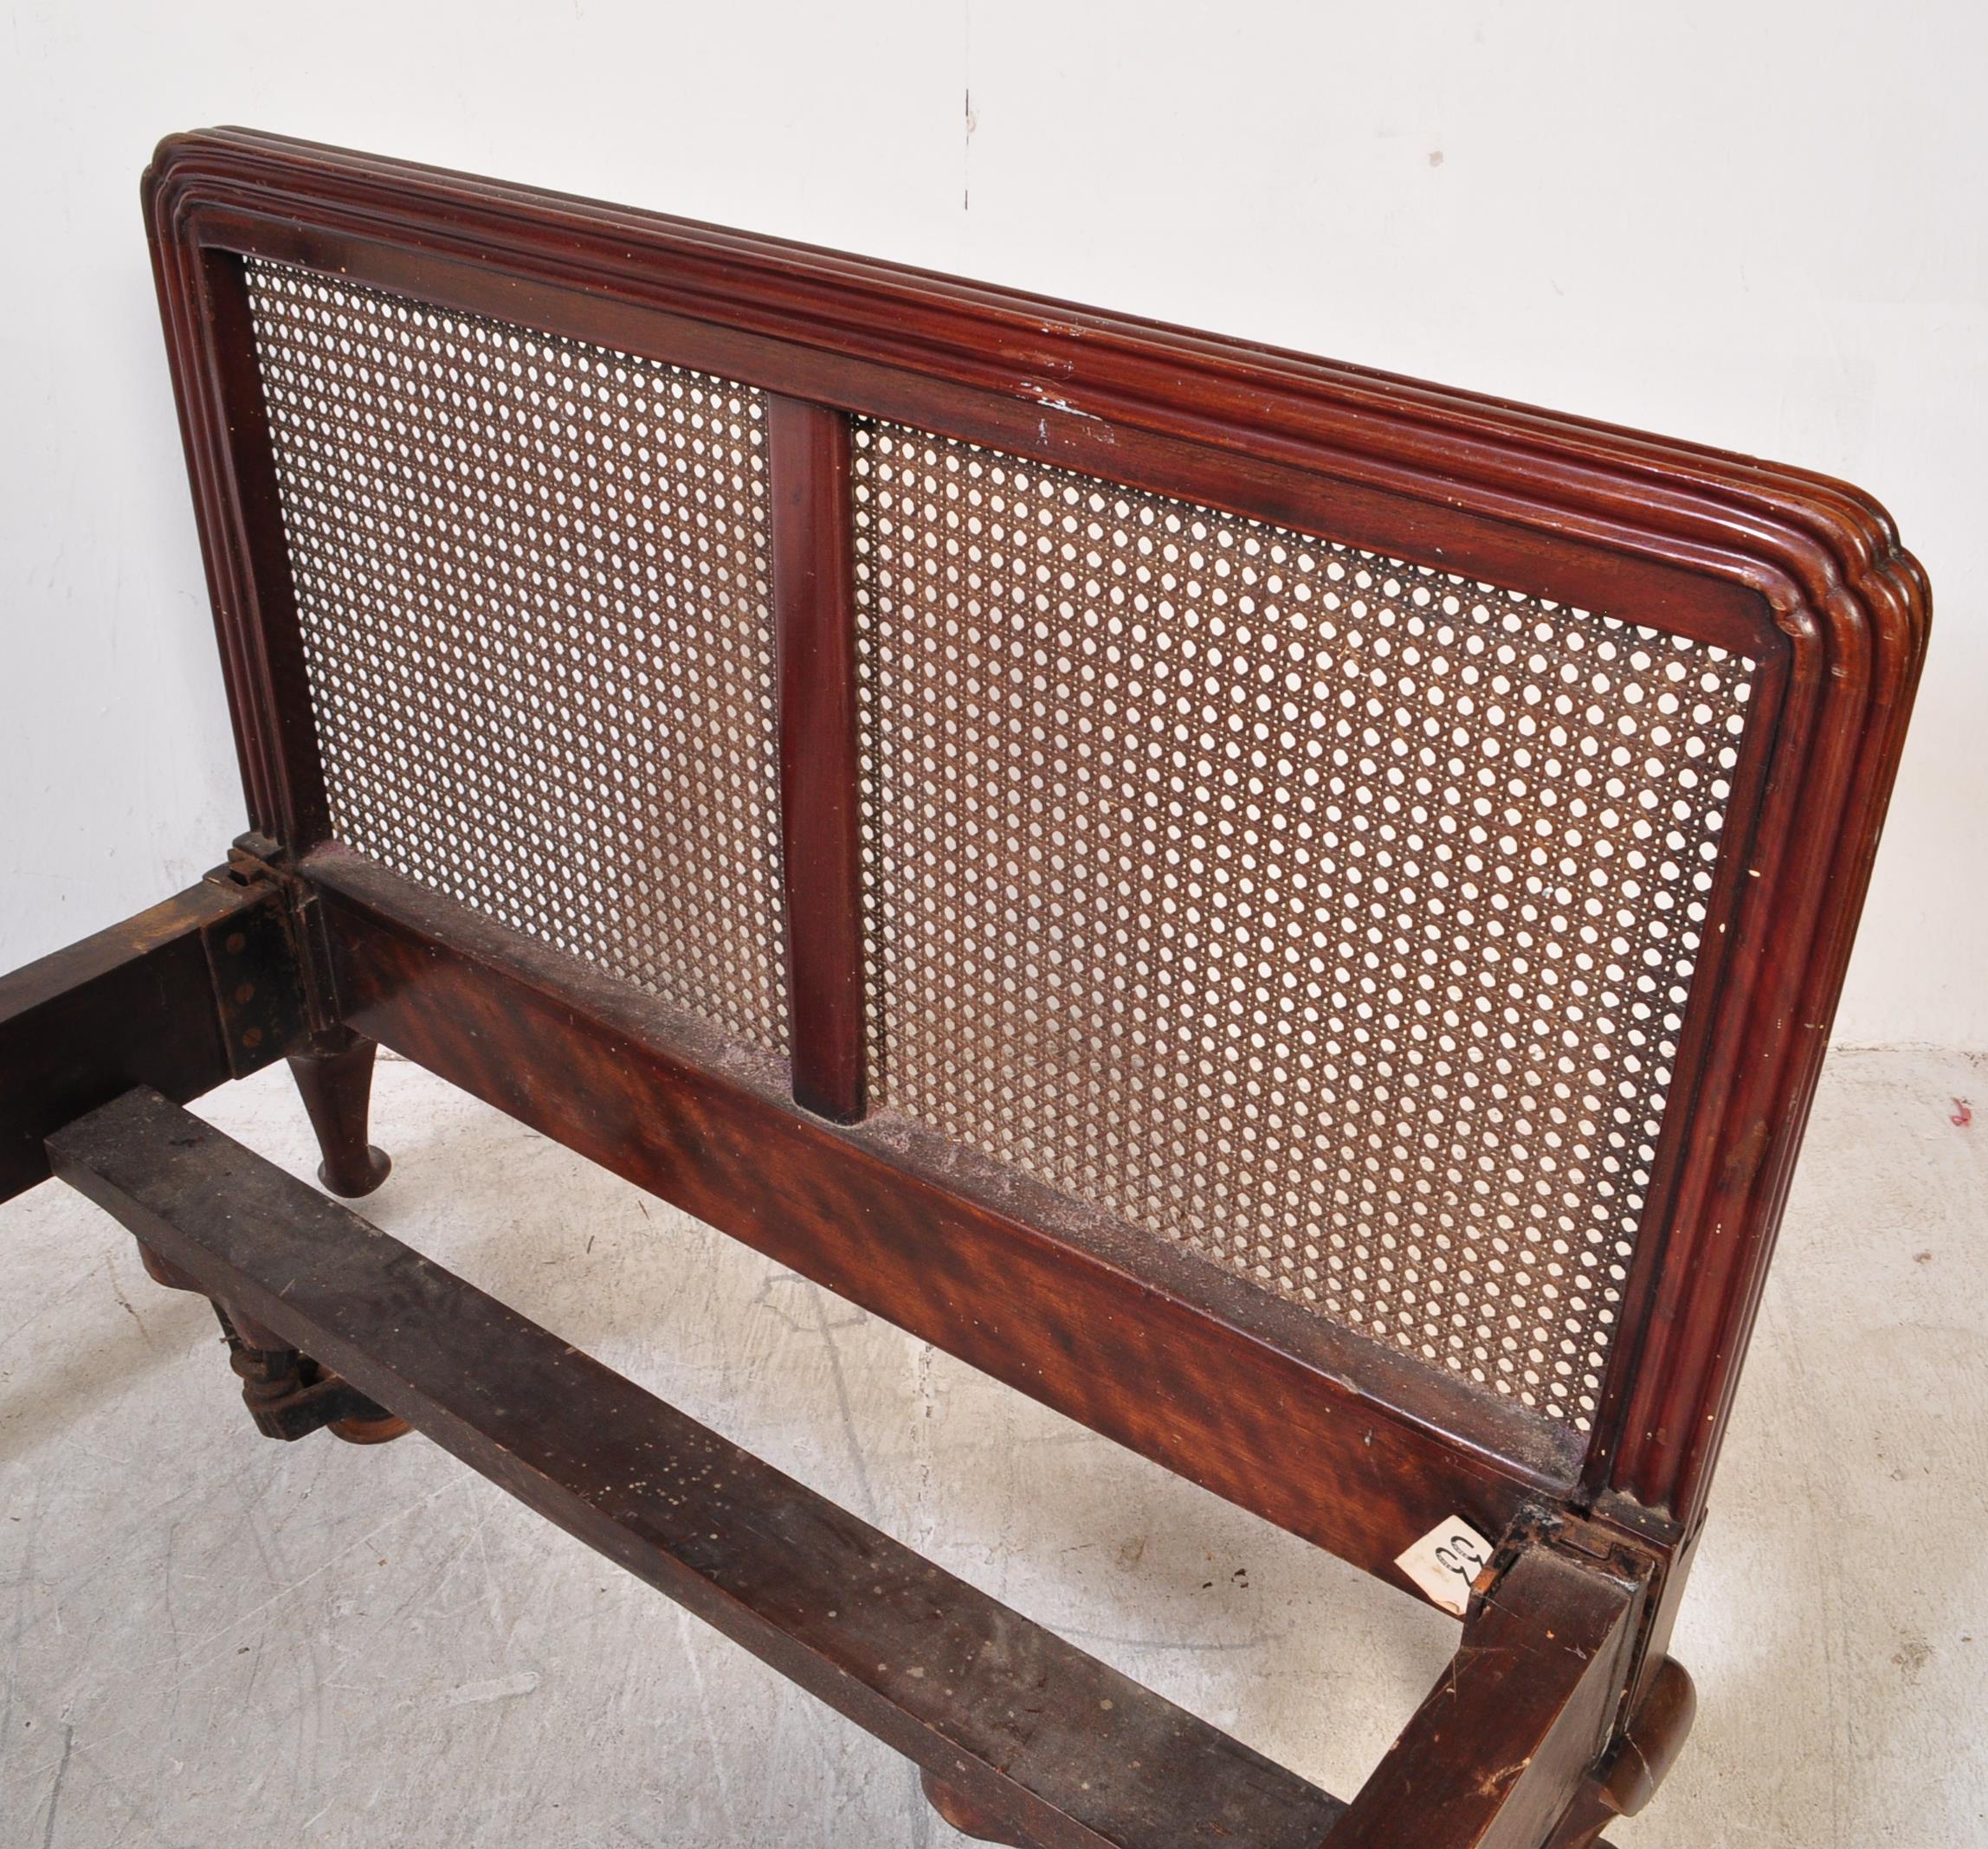 EARLY 20TH CENTURY BERGERE MAHOGANY SINGLE BED FRAME - Image 4 of 5